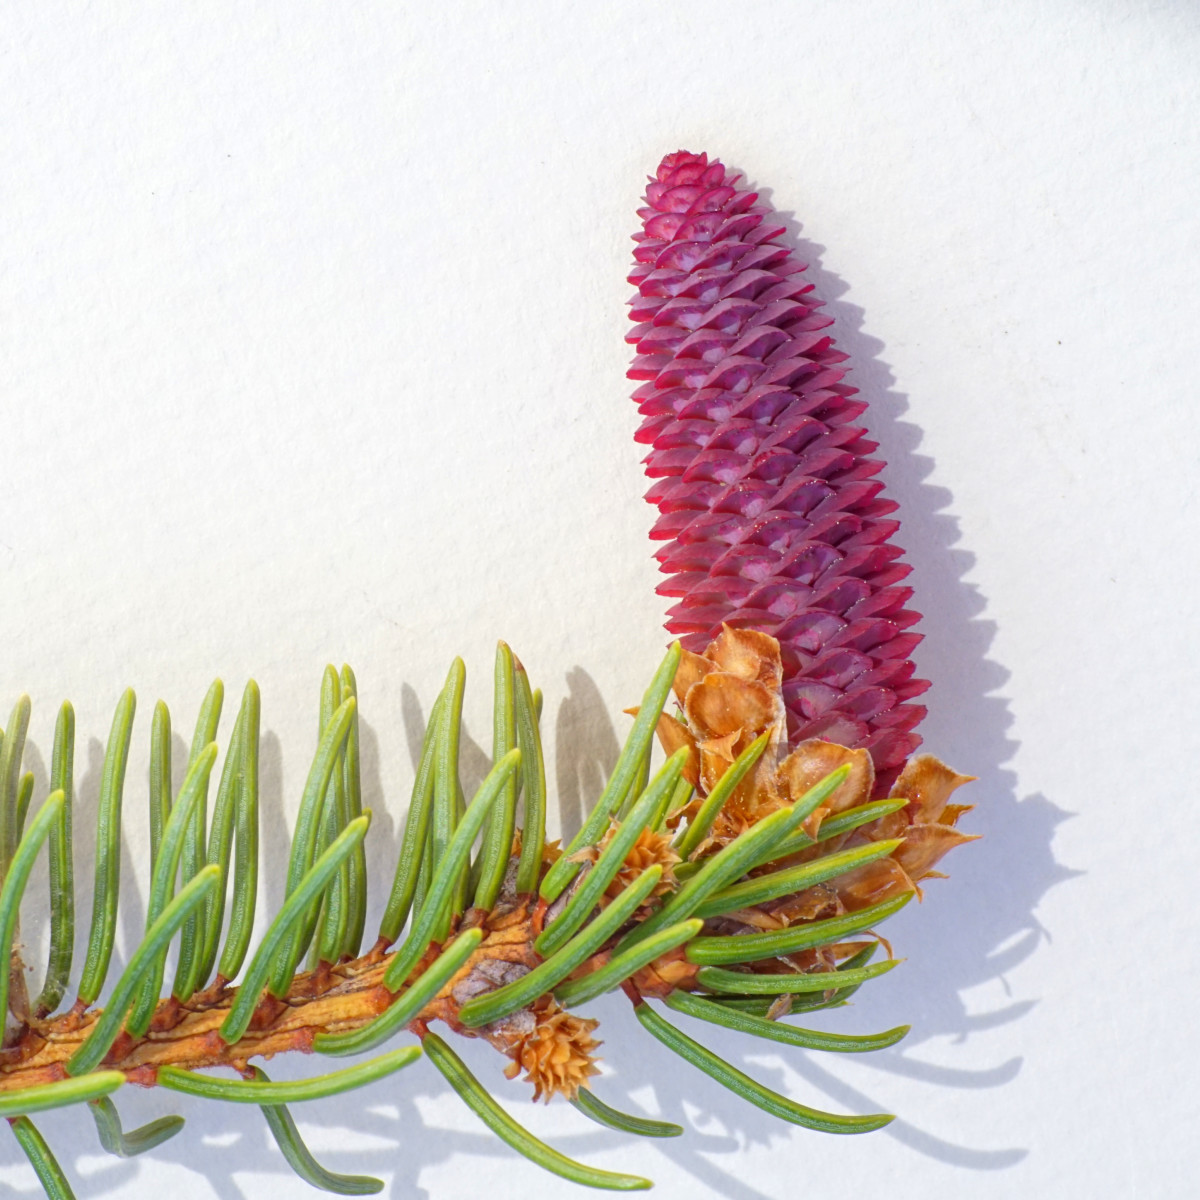 Norway Spruce seed cone (early spring)